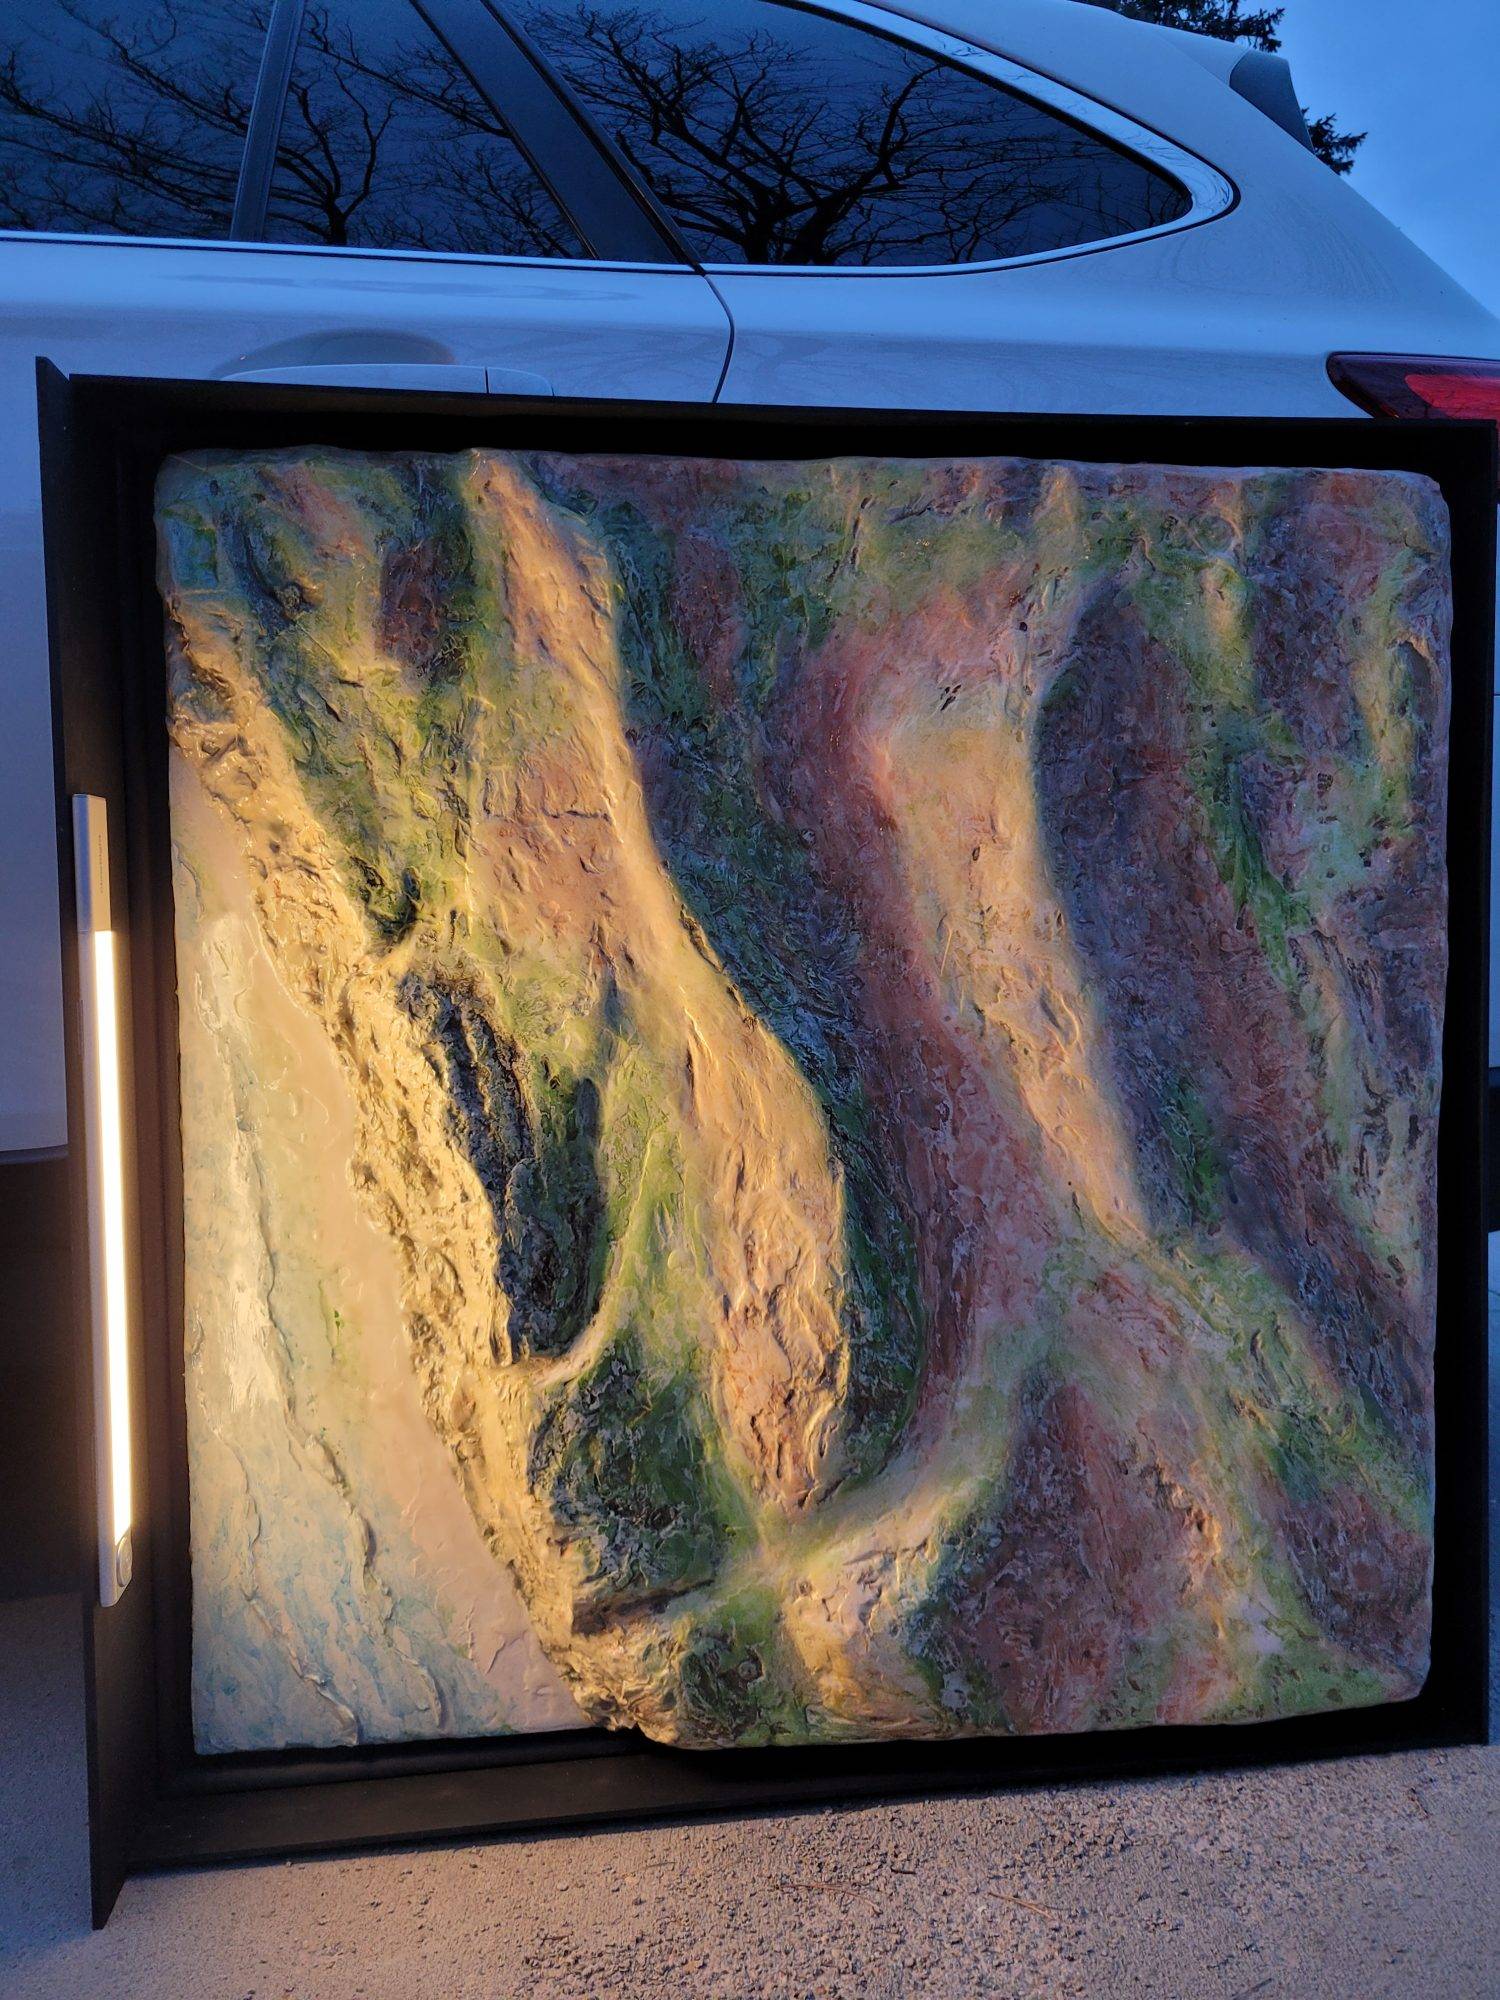 3D sculpture of land at Jalama Beach, California painted in watercolor, equipped with motion sensor light on the left side pretending to be the setting sun.